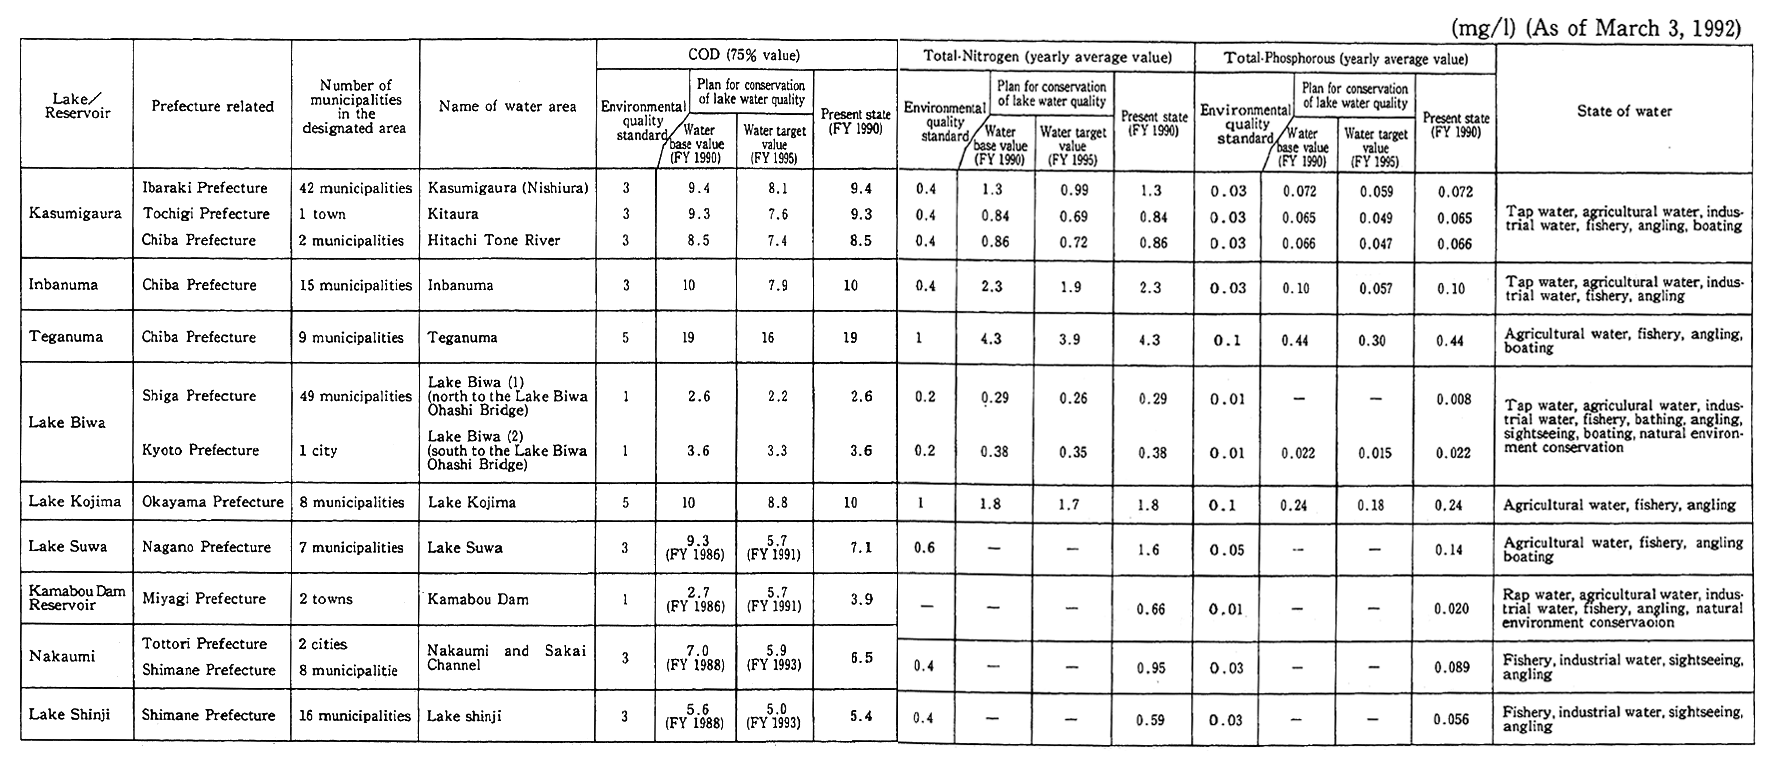 Table 7-4-1 Outline of Designated Lakes and Reservoirs